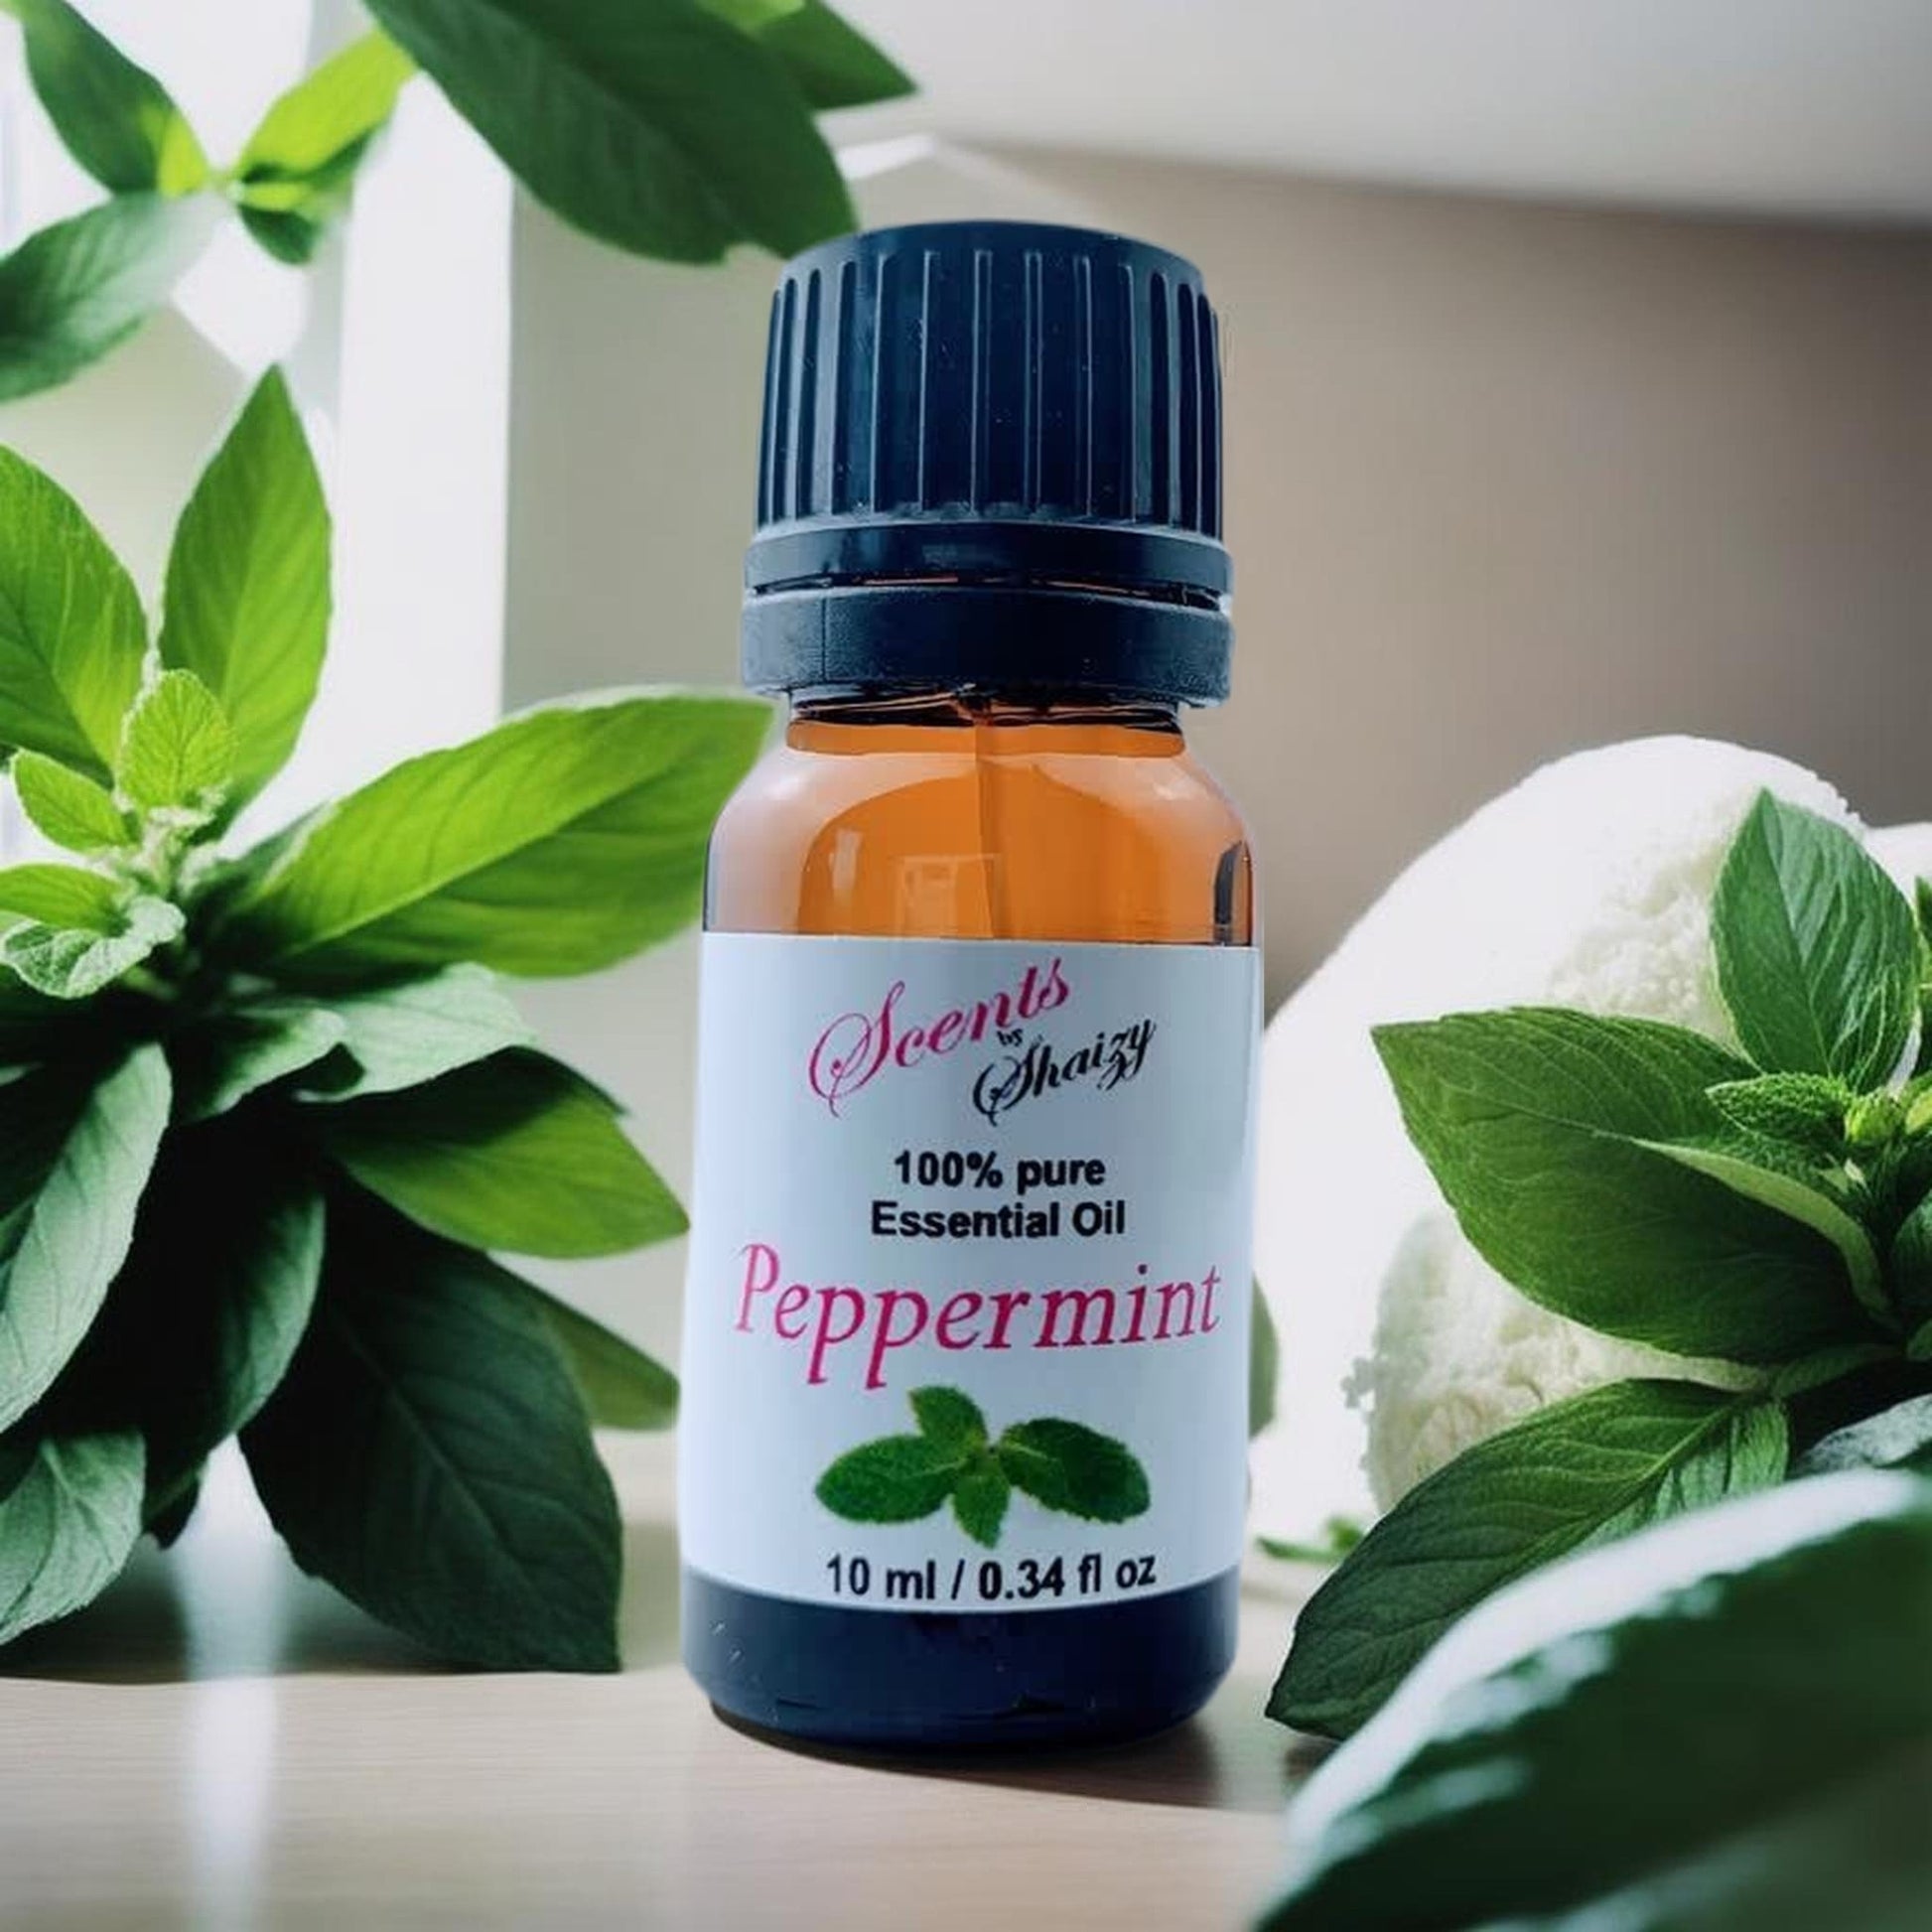 Peppermint Essential Oils \ Scents by Shaizy